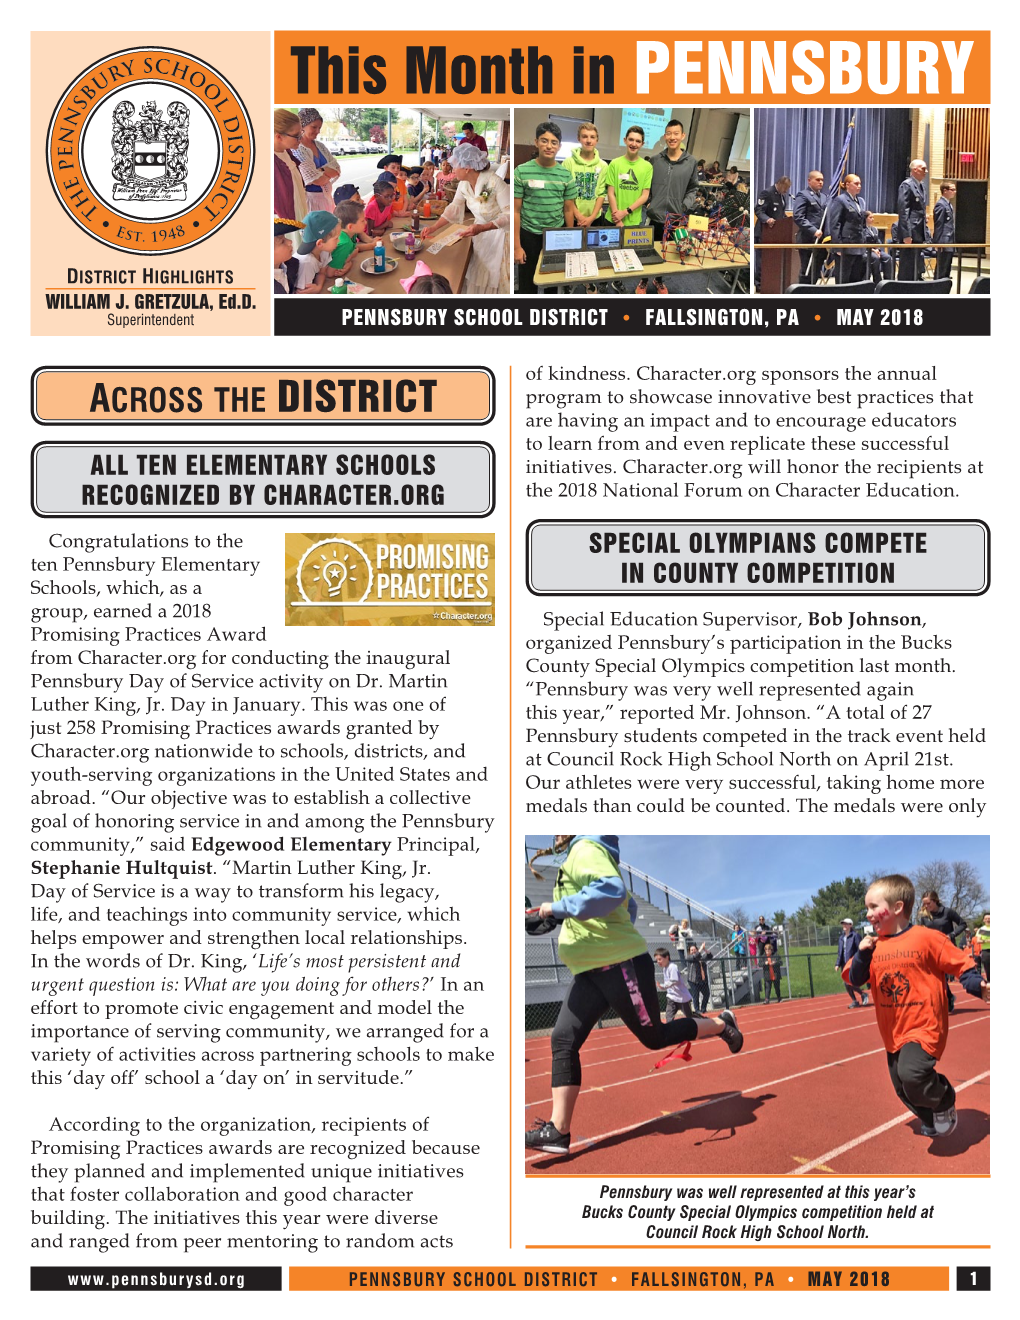 District Highlights Report 5 18